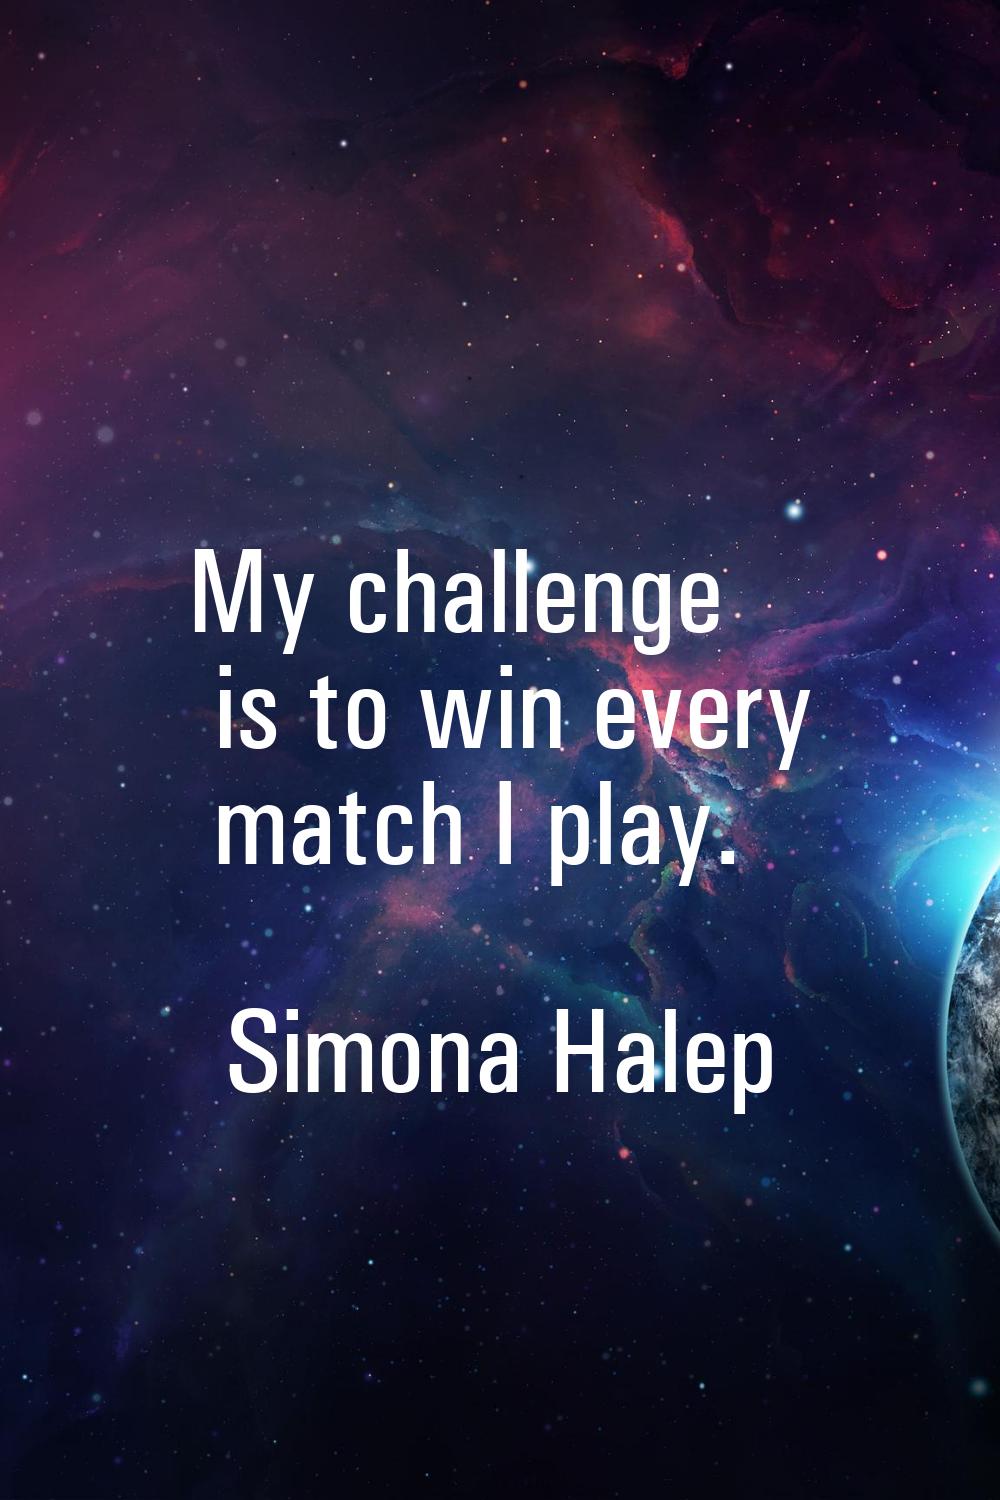 My challenge is to win every match I play.